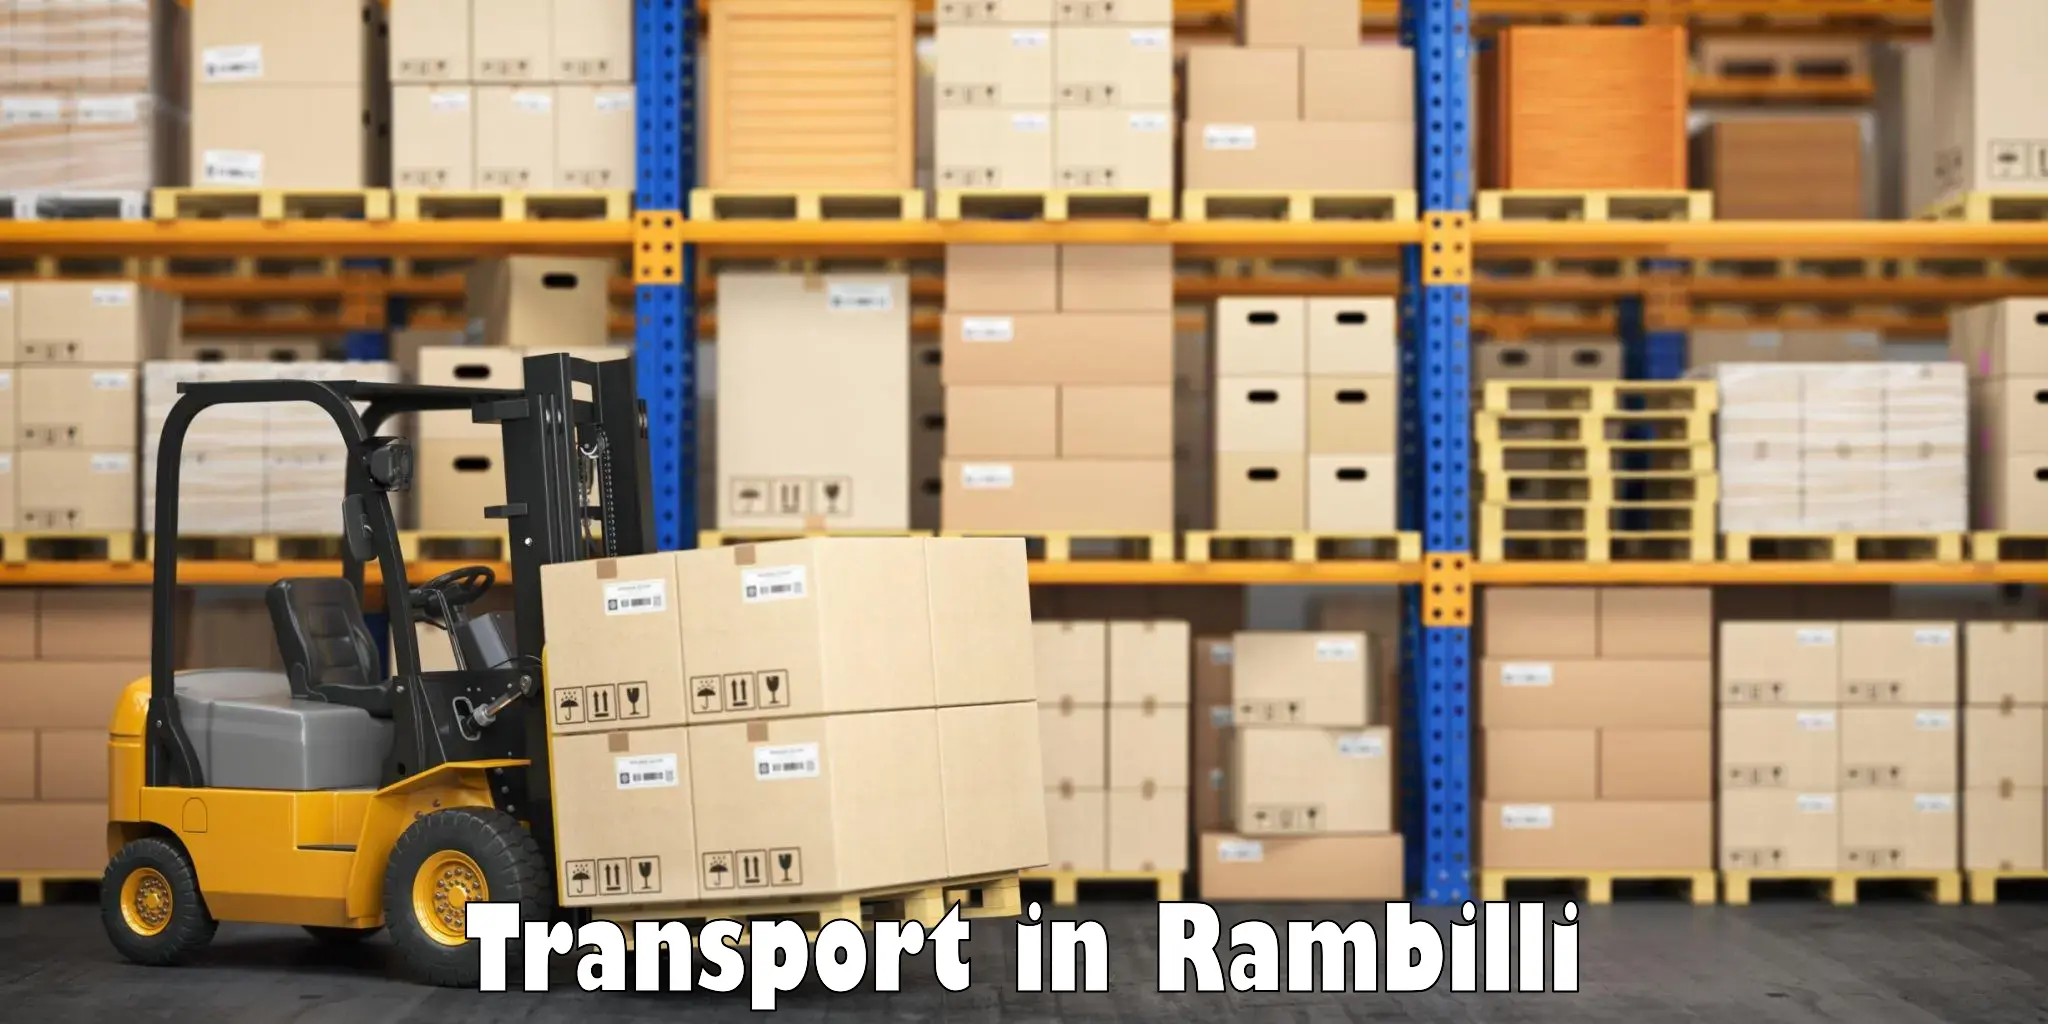 Daily transport service in Rambilli